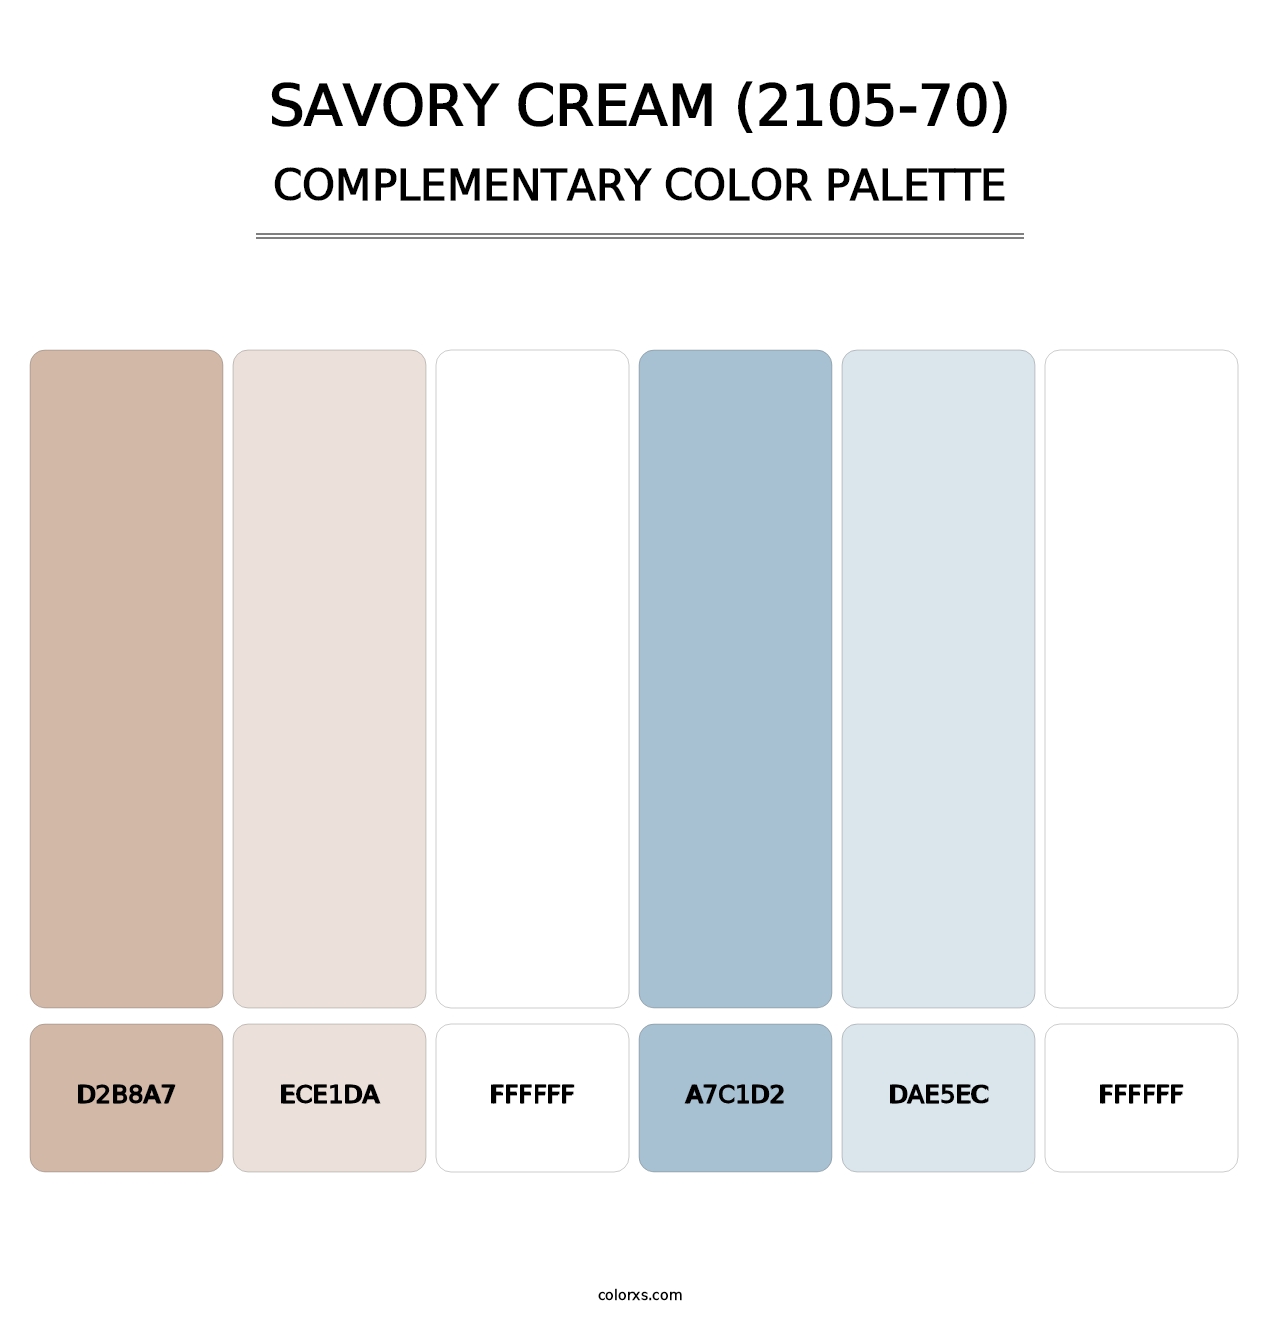 Savory Cream (2105-70) - Complementary Color Palette